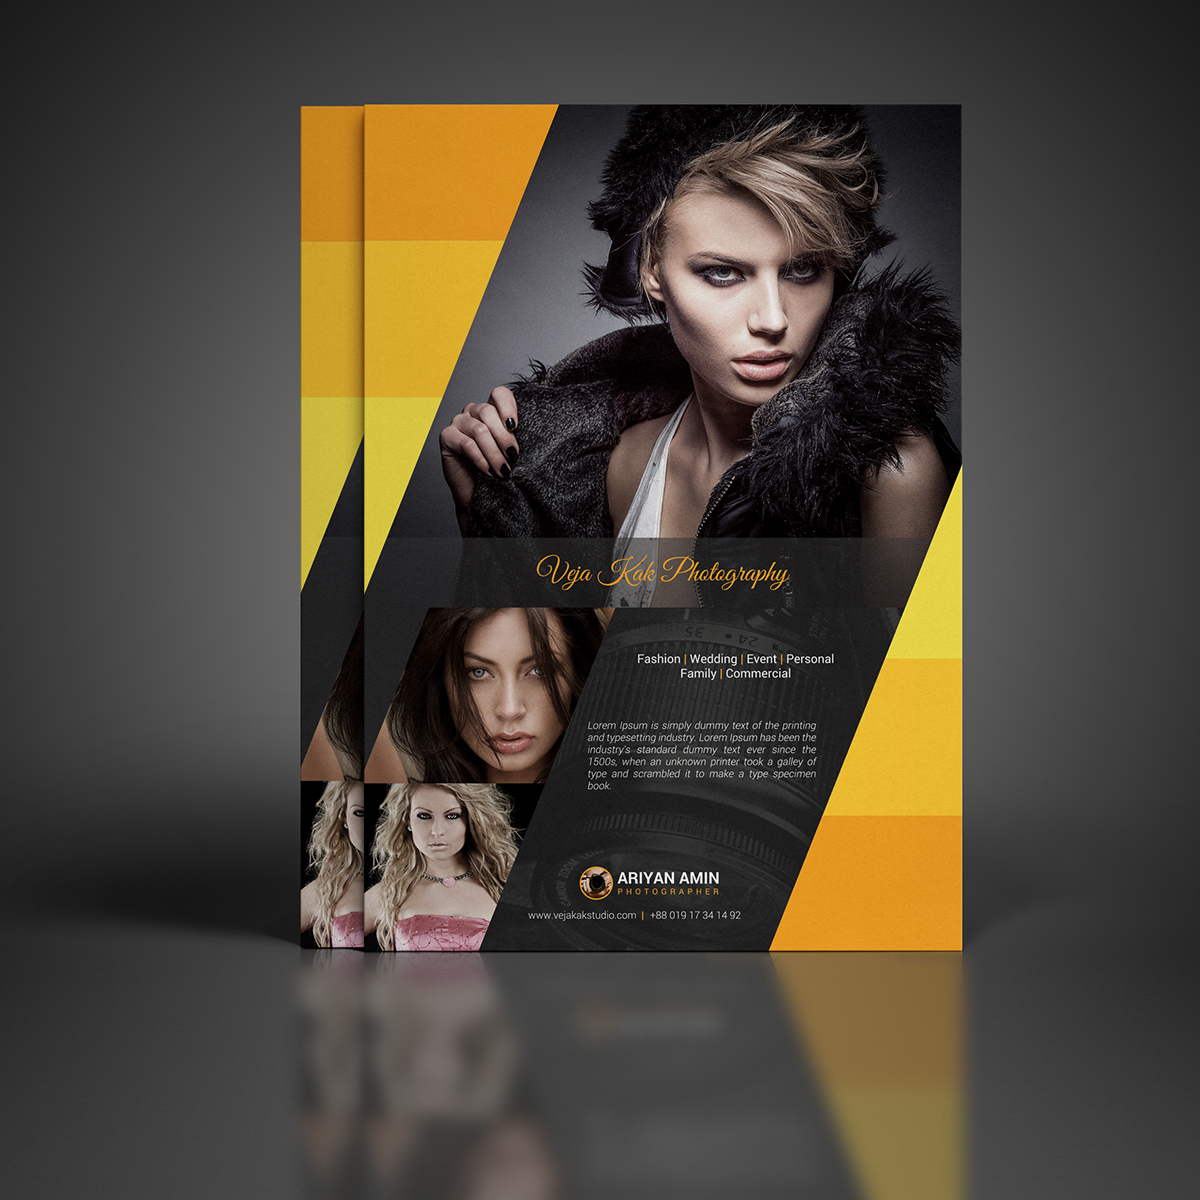 Photography Flyer Template on Behance Regarding Photography Flyer Templates Photoshop